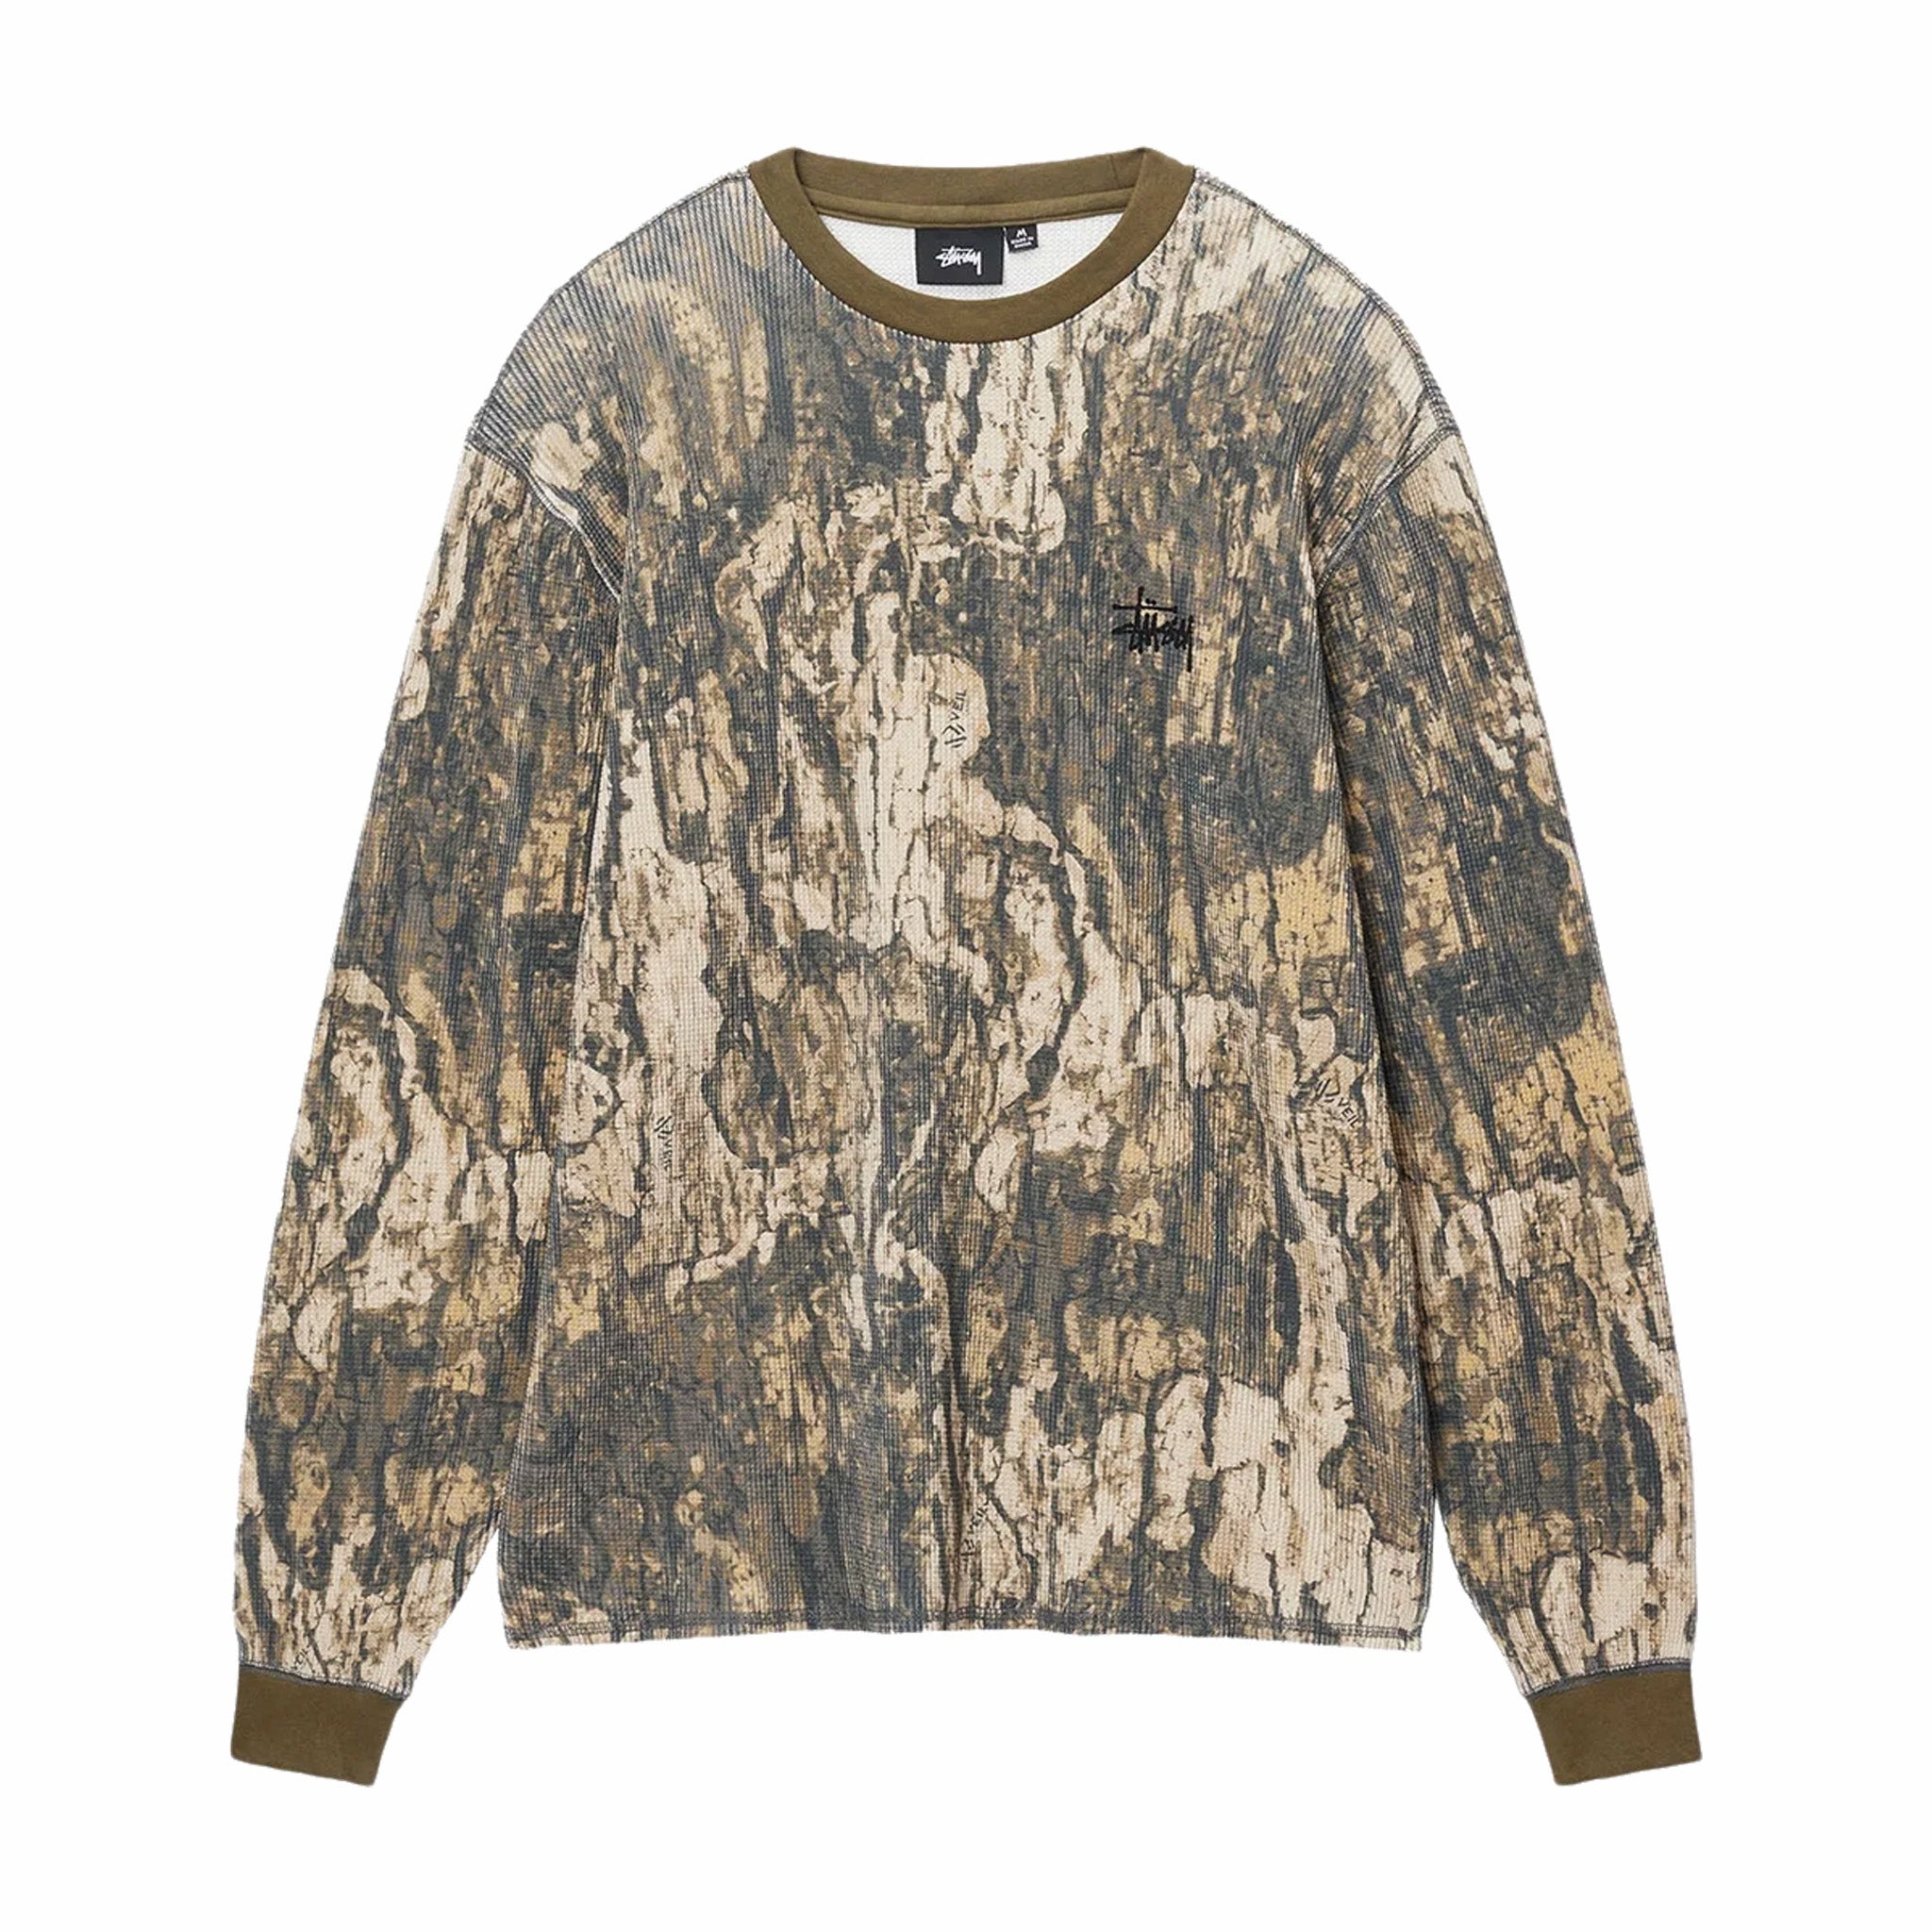 Stüssy Basic Stock LS Thermal (Relic Camo) – August